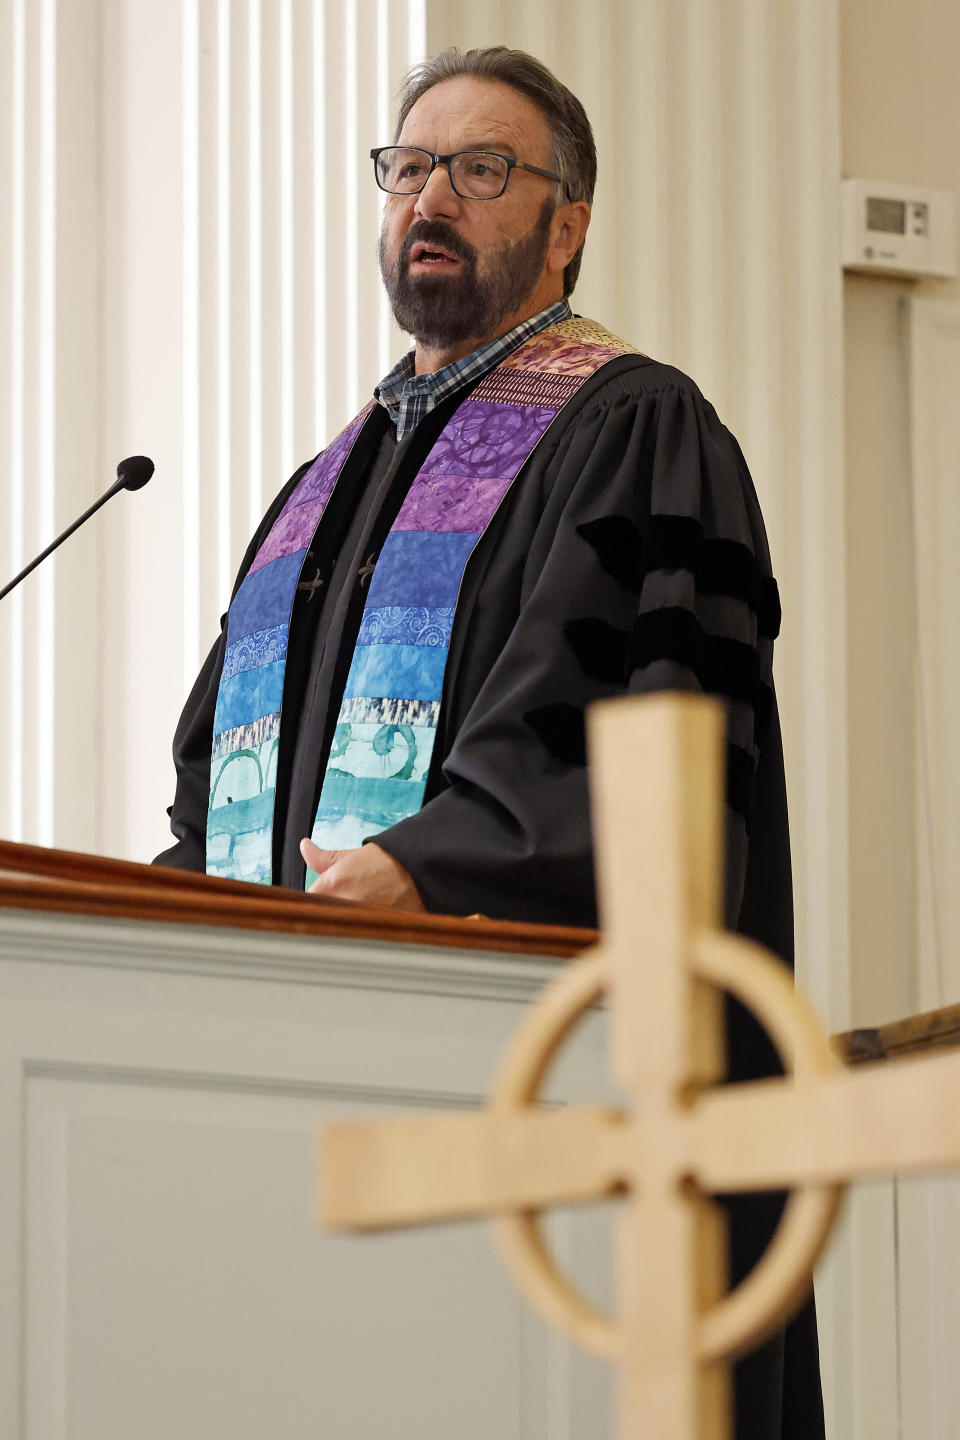 Pastor Mike Usey delivers his sermon to the congregation at College Park Baptist Church in Greensboro, N.C., Sunday, Sept. 25, 2022. The College Park church found itself in the news last week when the Southern Baptist Convention's Executive Committee voted to remove it from its rolls because of its “open affirmation, approval and endorsement of homosexual behavior." That action came 23 years after the congregation itself voted to leave the SBC, but according to the Executive Committee, it had remained on its rolls until now.(AP Photo/Karl DeBlaker)